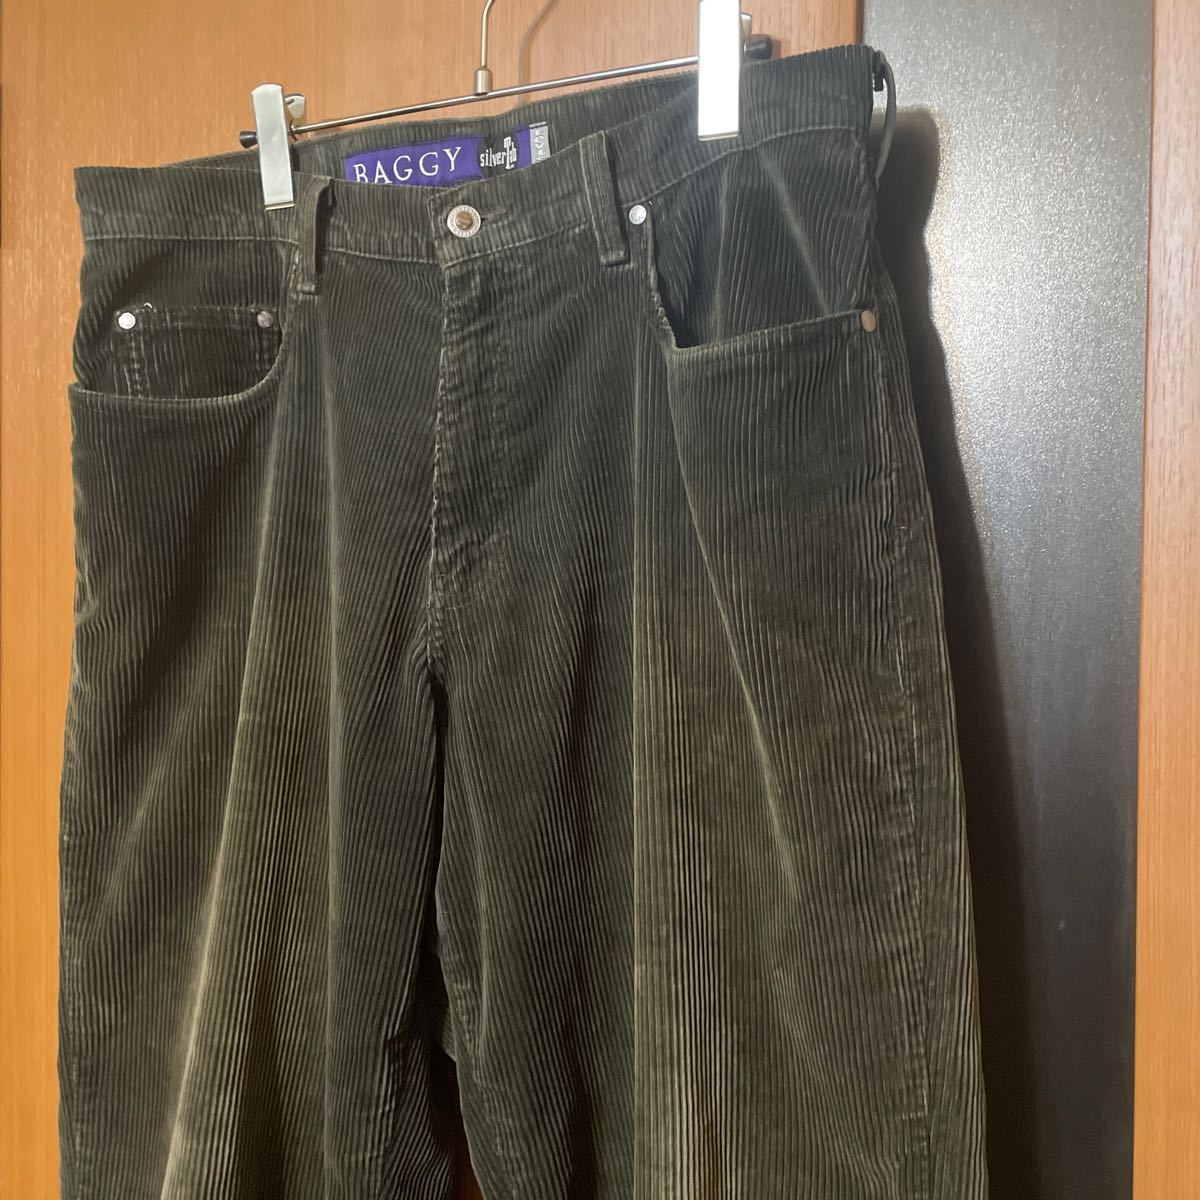  rare 90s[LEVIS]USA made [SILVER TAB] corduroy baggy pants Levi's silver tabBAGGY Street old clothes VINTAGE Vintage 